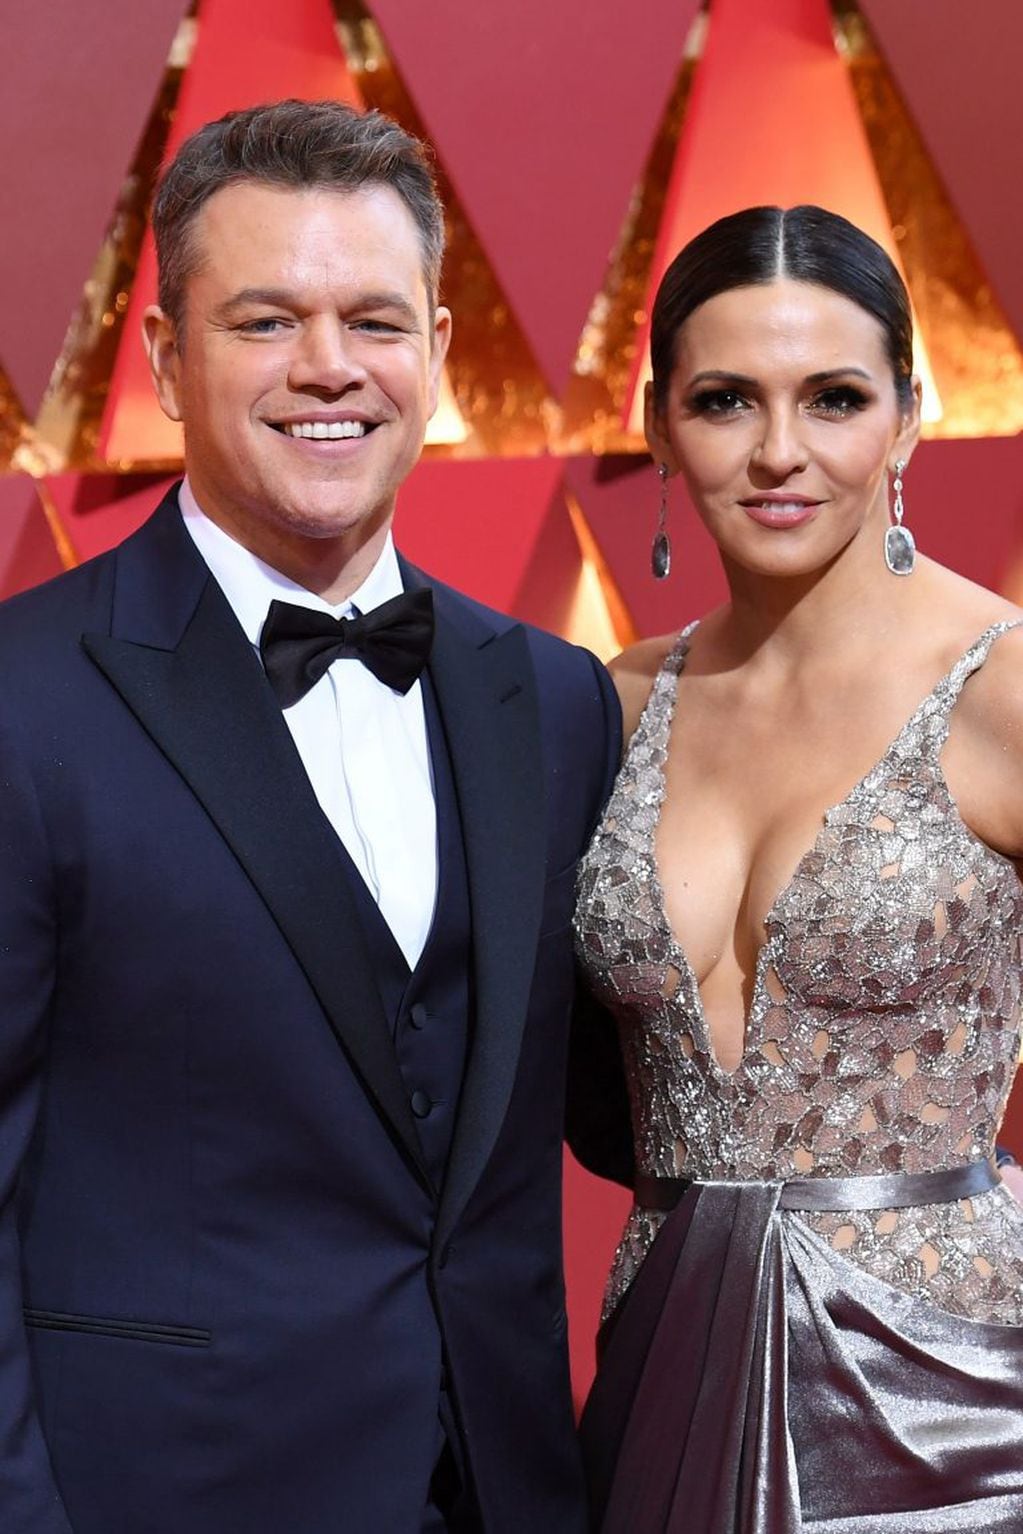 US actor Matt Damon (L) and his wife wife Luciana Barroso pose as they arrive on the red carpet for the 89th Oscars on February 26, 2017 in Hollywood, California.  / AFP PHOTO / ANGELA WEISS